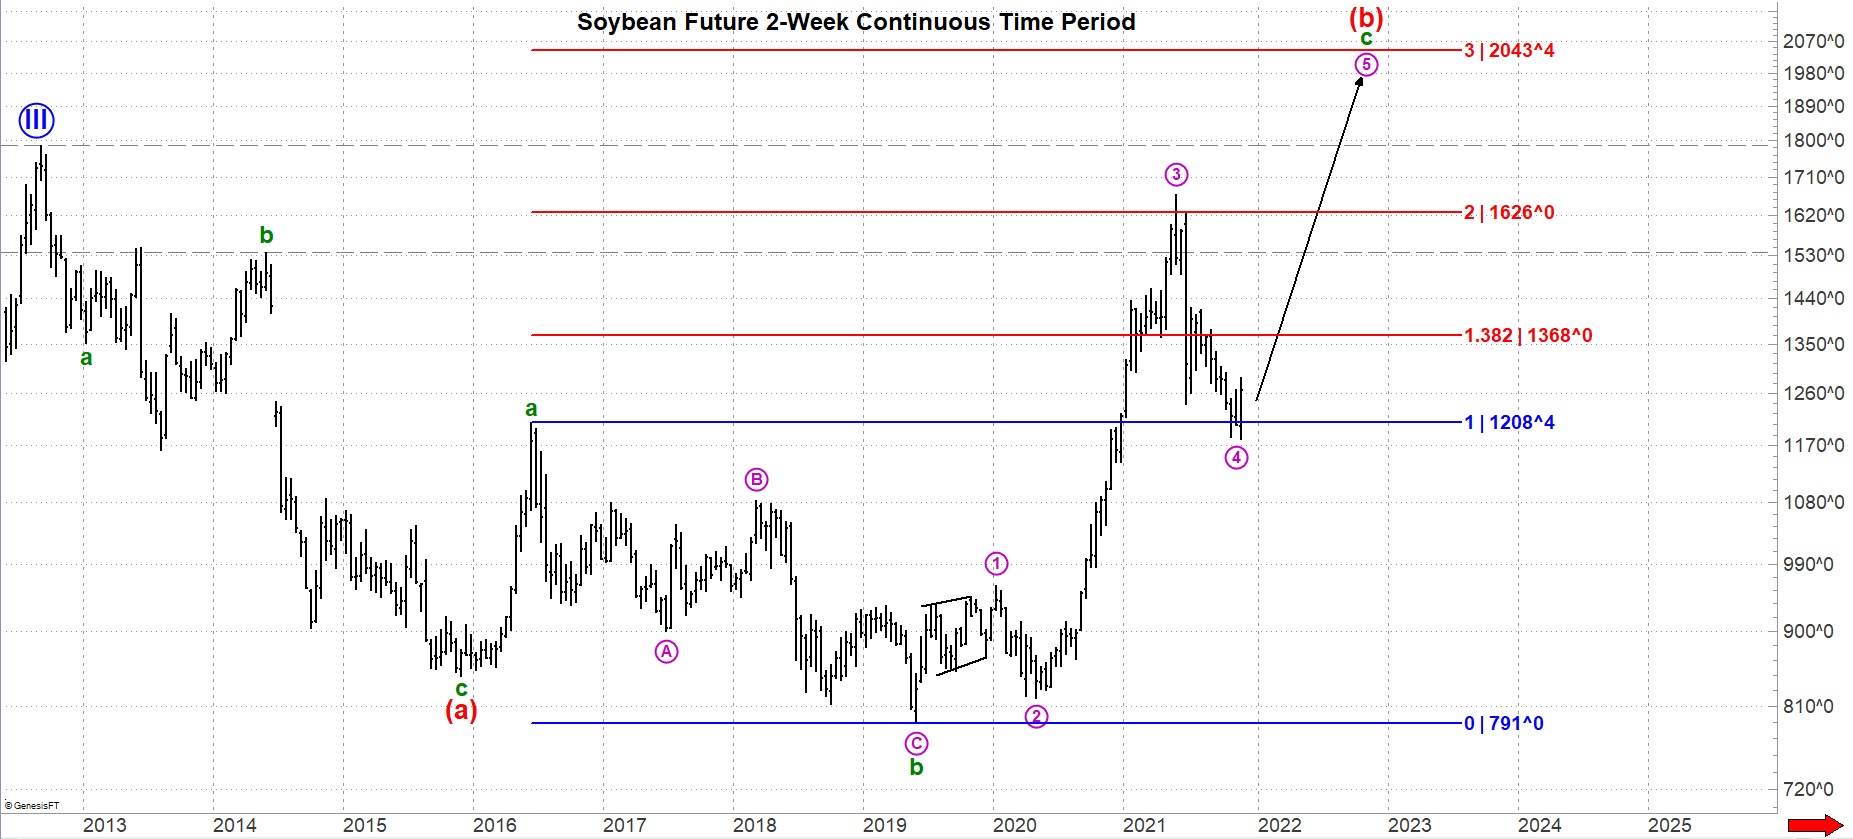 Soybean weekly Futures